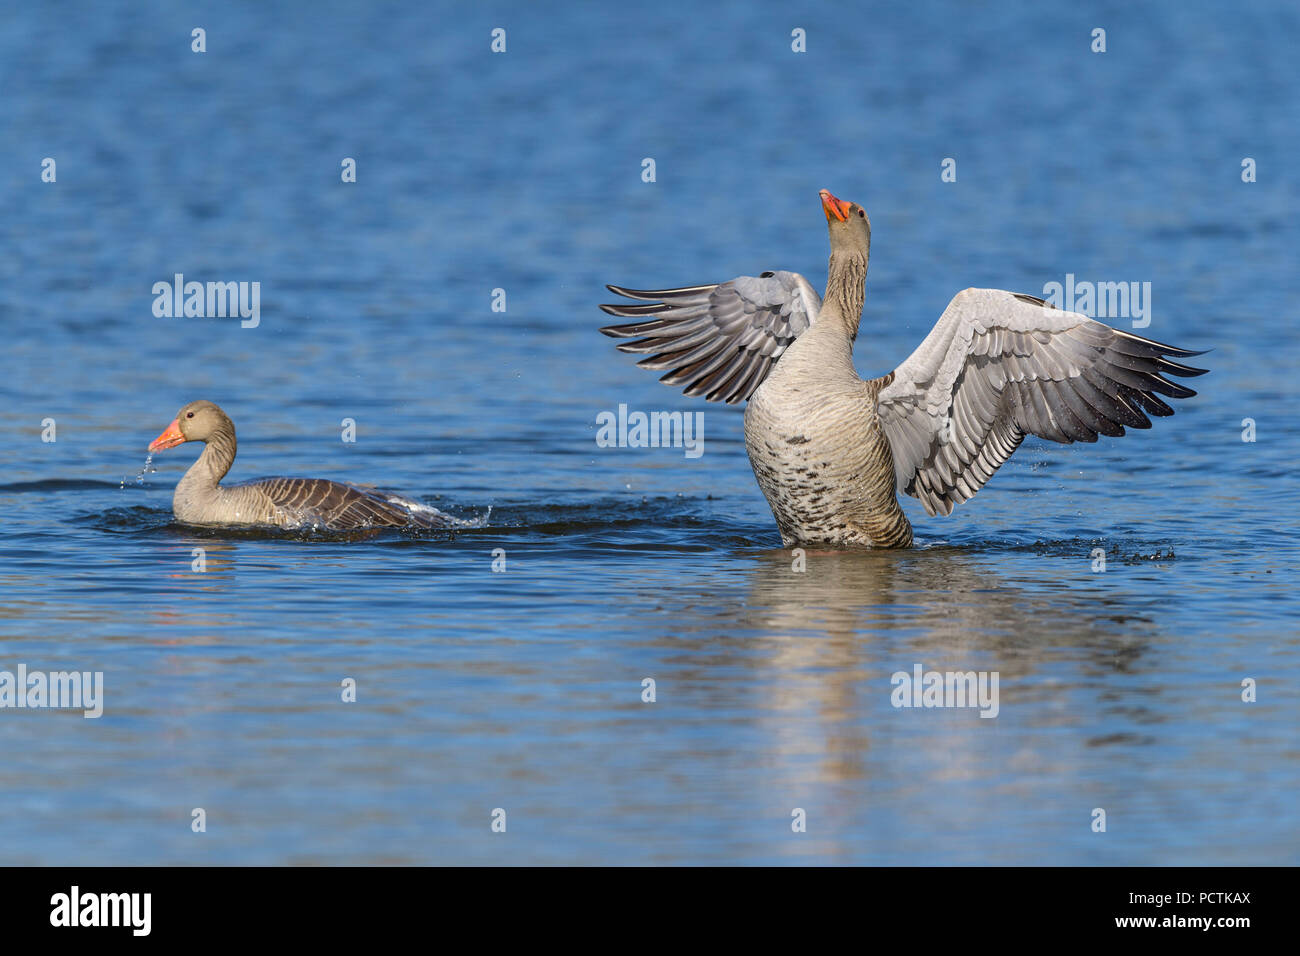 Greylag Goose, Anser anser, in water, beats with wings Stock Photo